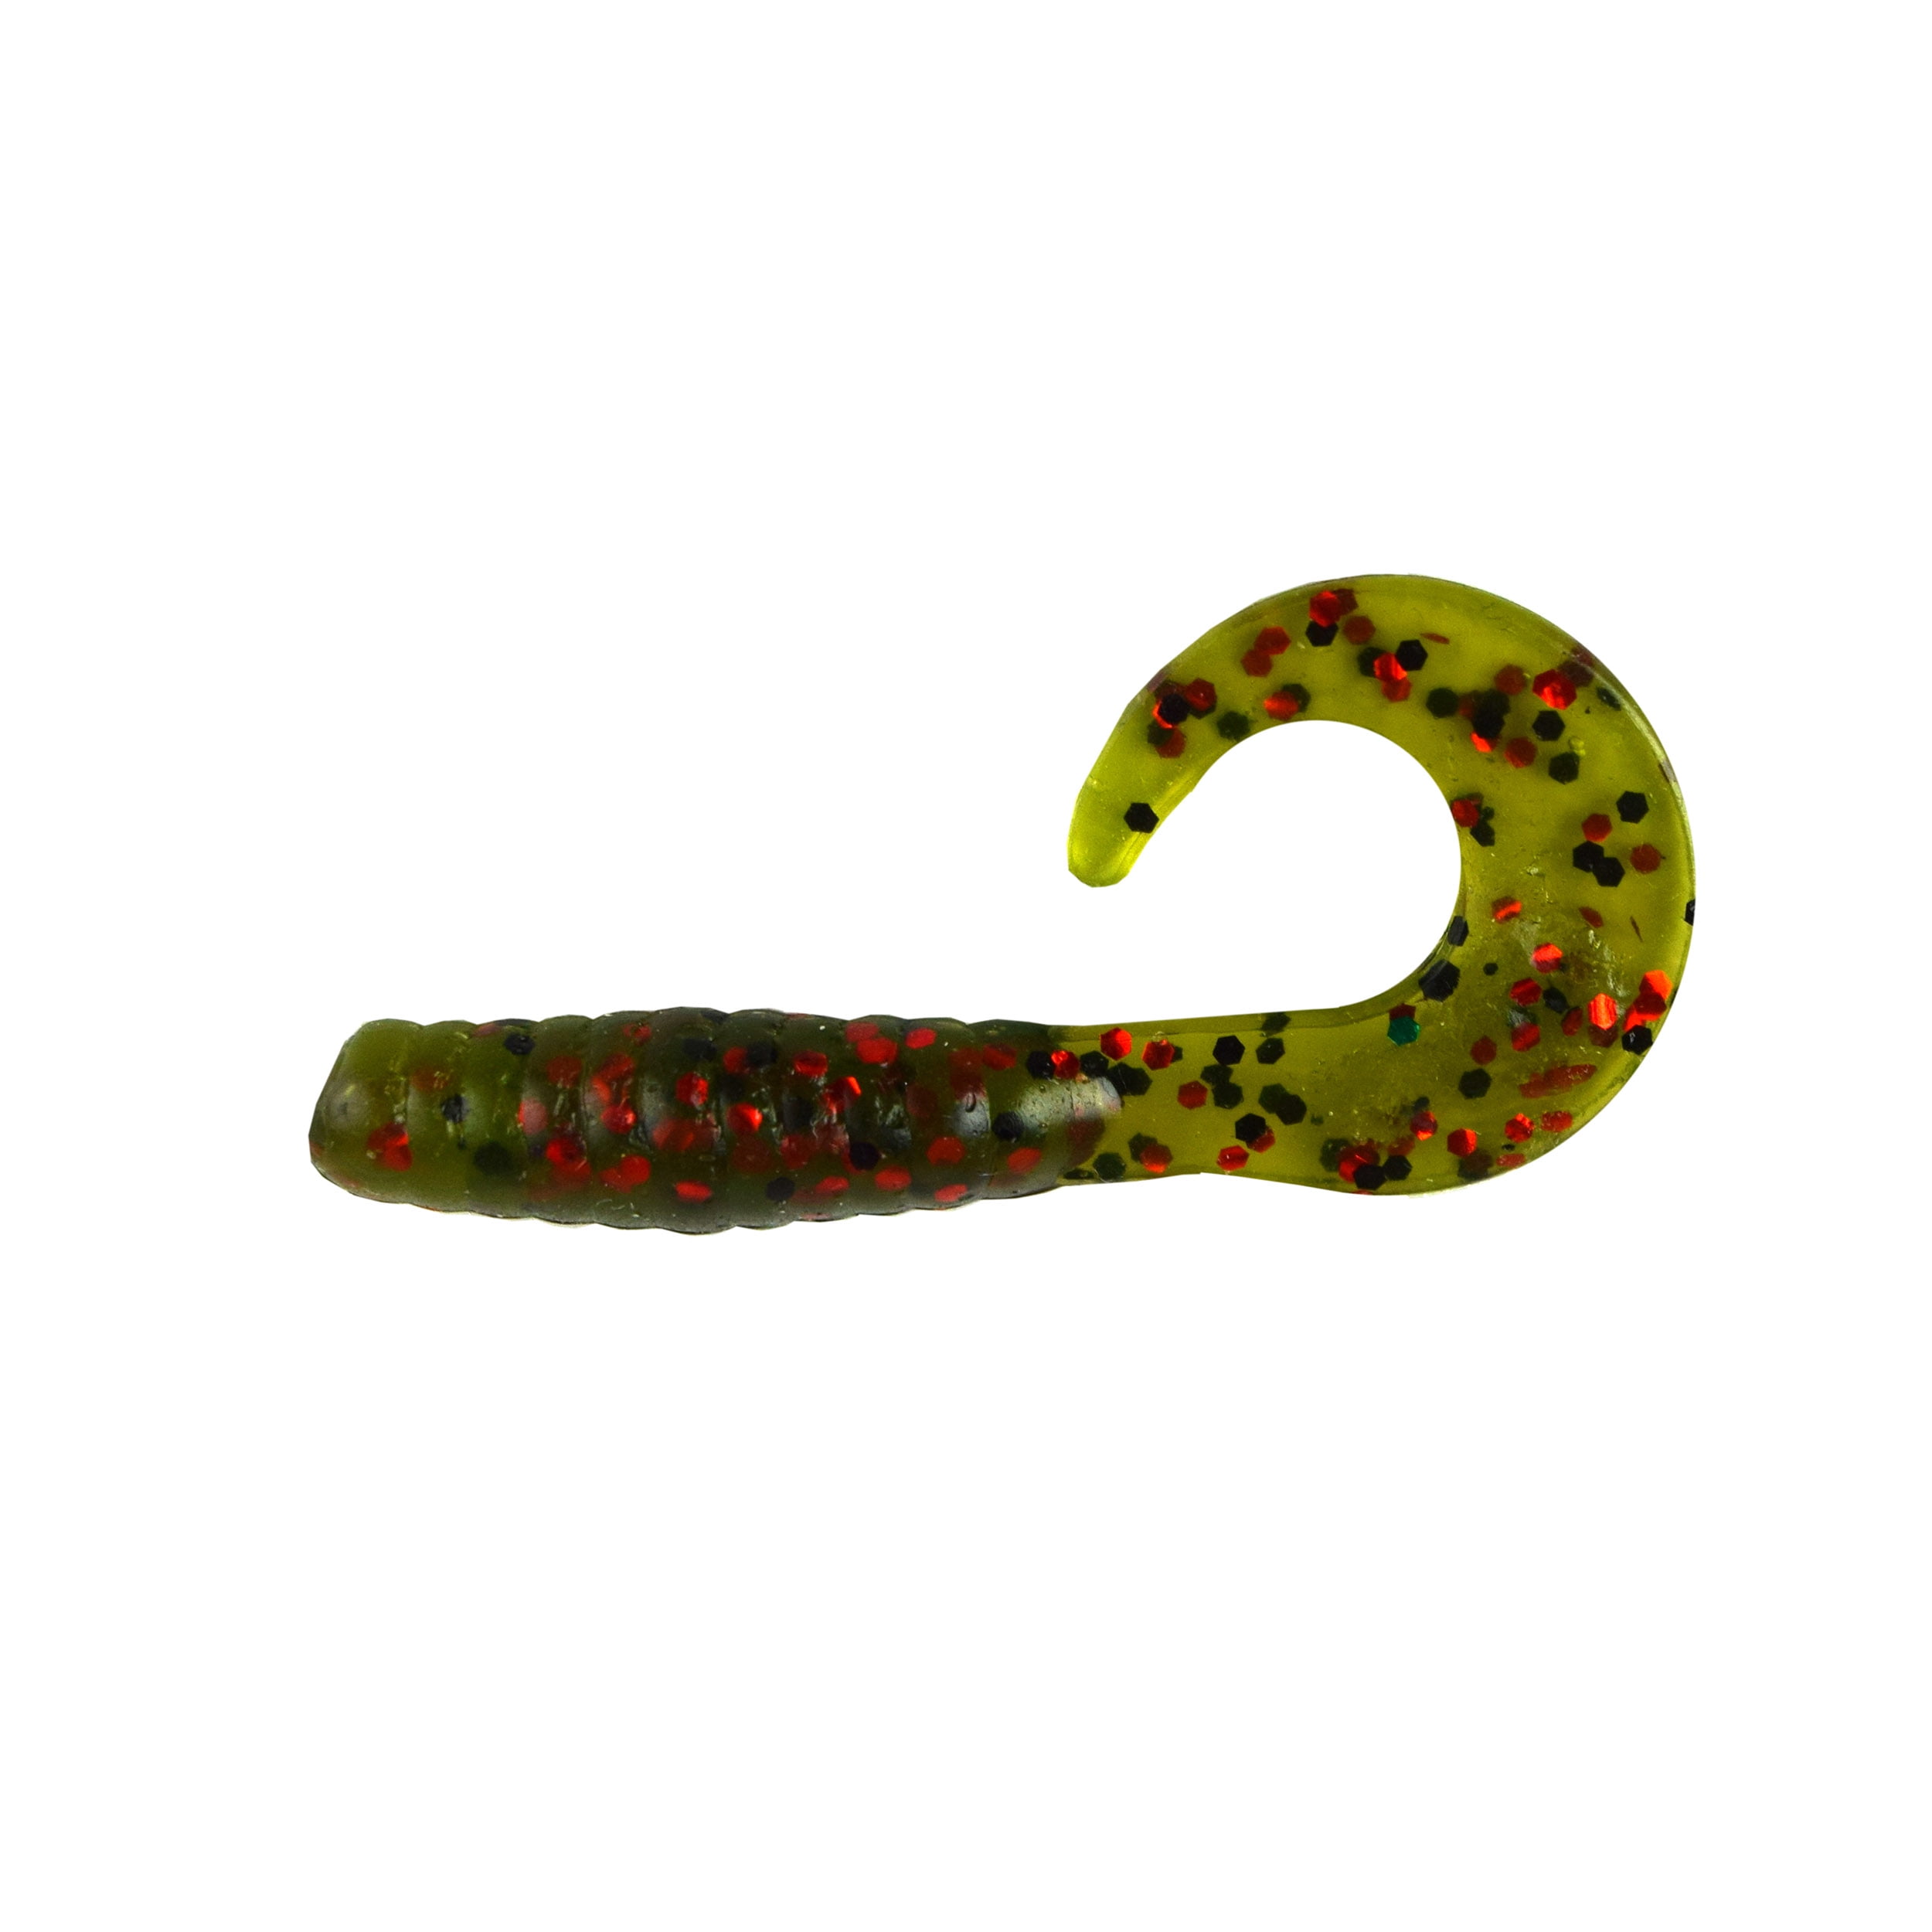 Tackle HD 70-Pack Grub Fishing Lures, 3-Inch Skirted Grub with Curly Tail, Bulk  Fishing Grubs for Crappie, Bass, Walleye, or Trout Bait, Freshwater or  Saltwater Swimbait, Black 